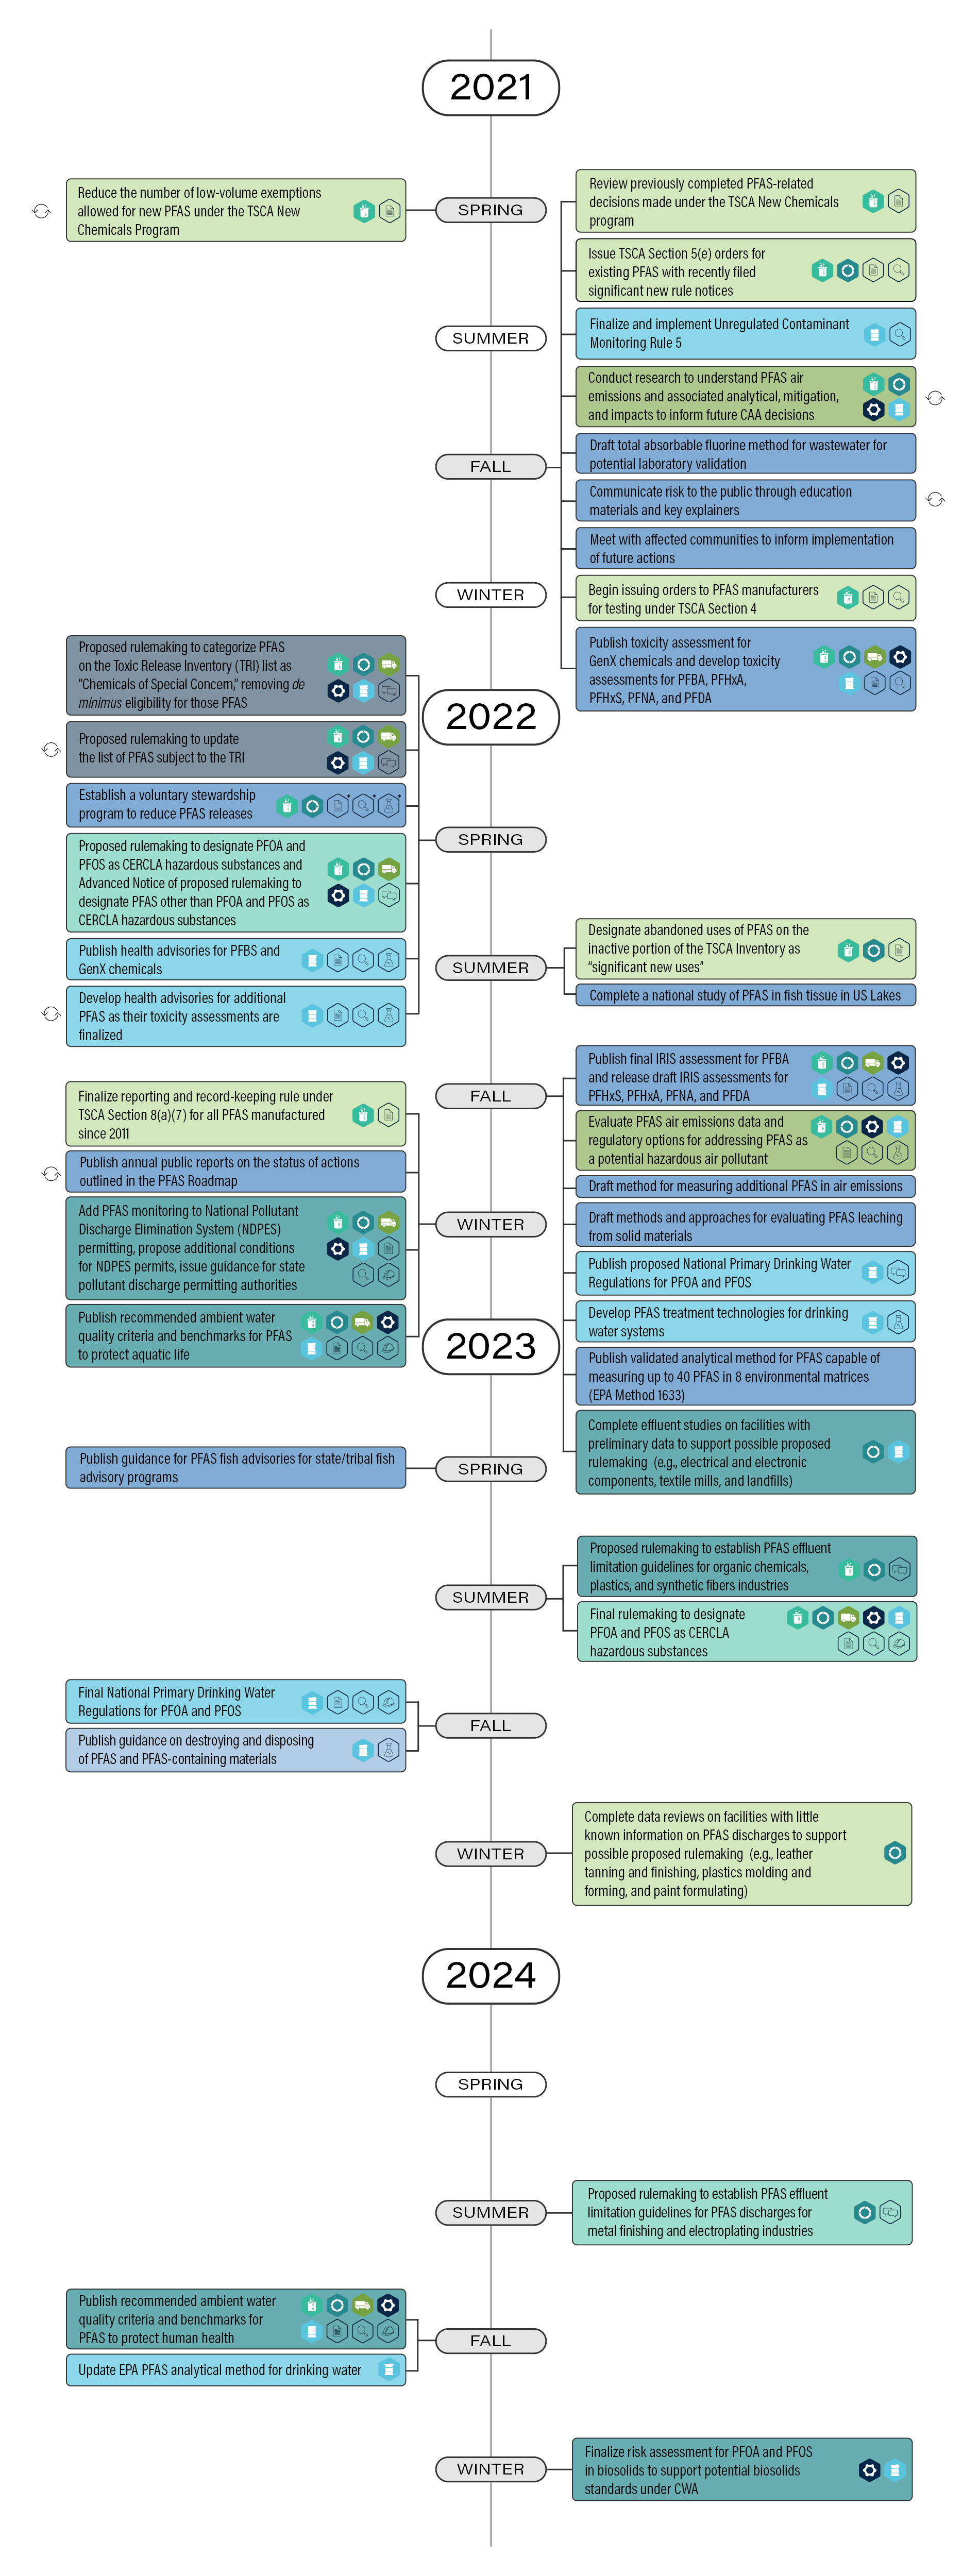 EPA PFAS Strategic Roadmap Timeline All Lifecycle Stages